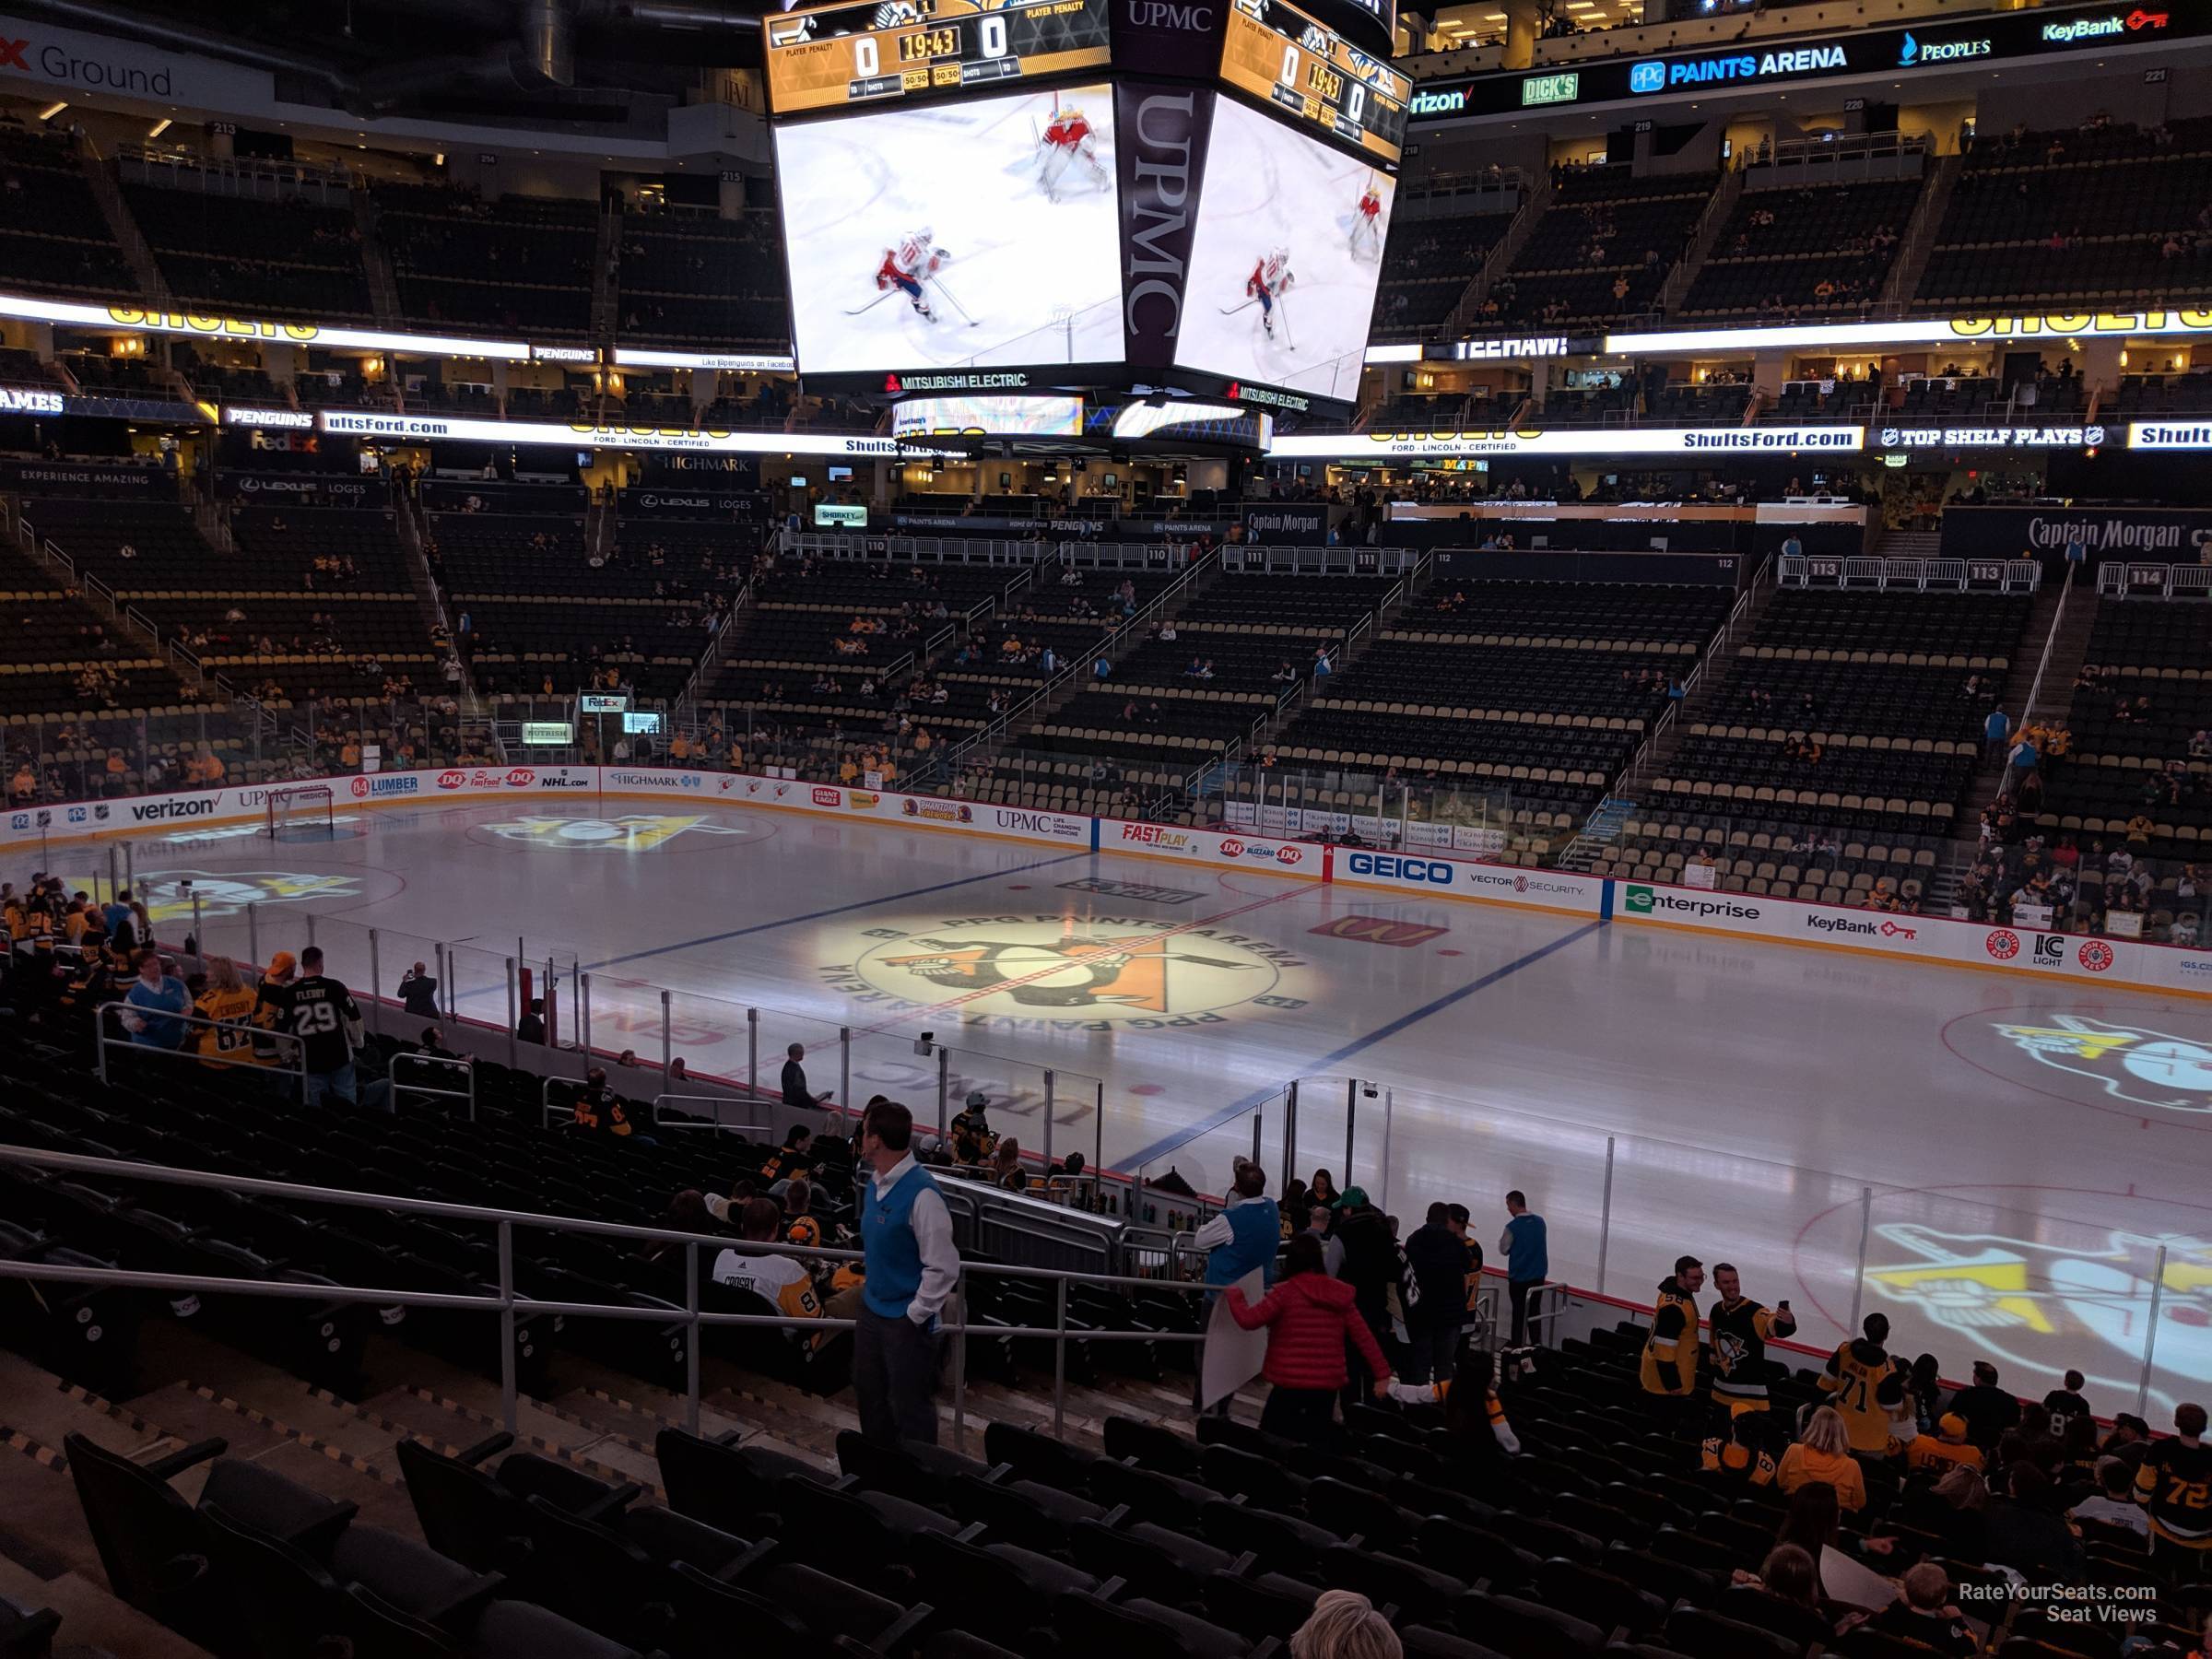 PPG Paints Arena, section 108, home of Pittsburgh Penguins